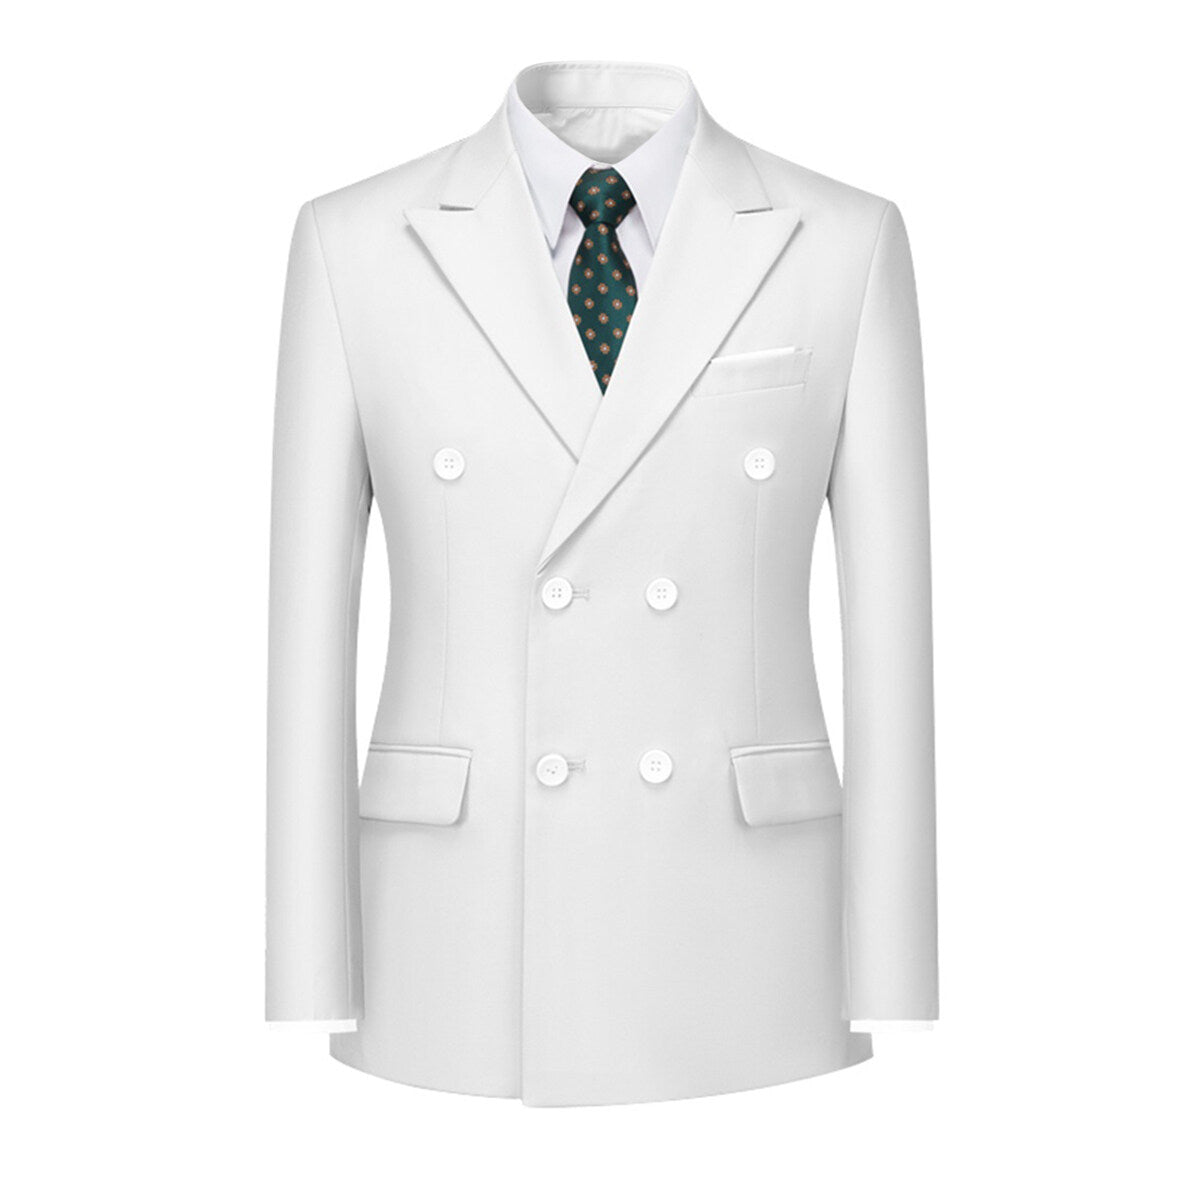 Men's Solid Color Double Breasted Business Suit White